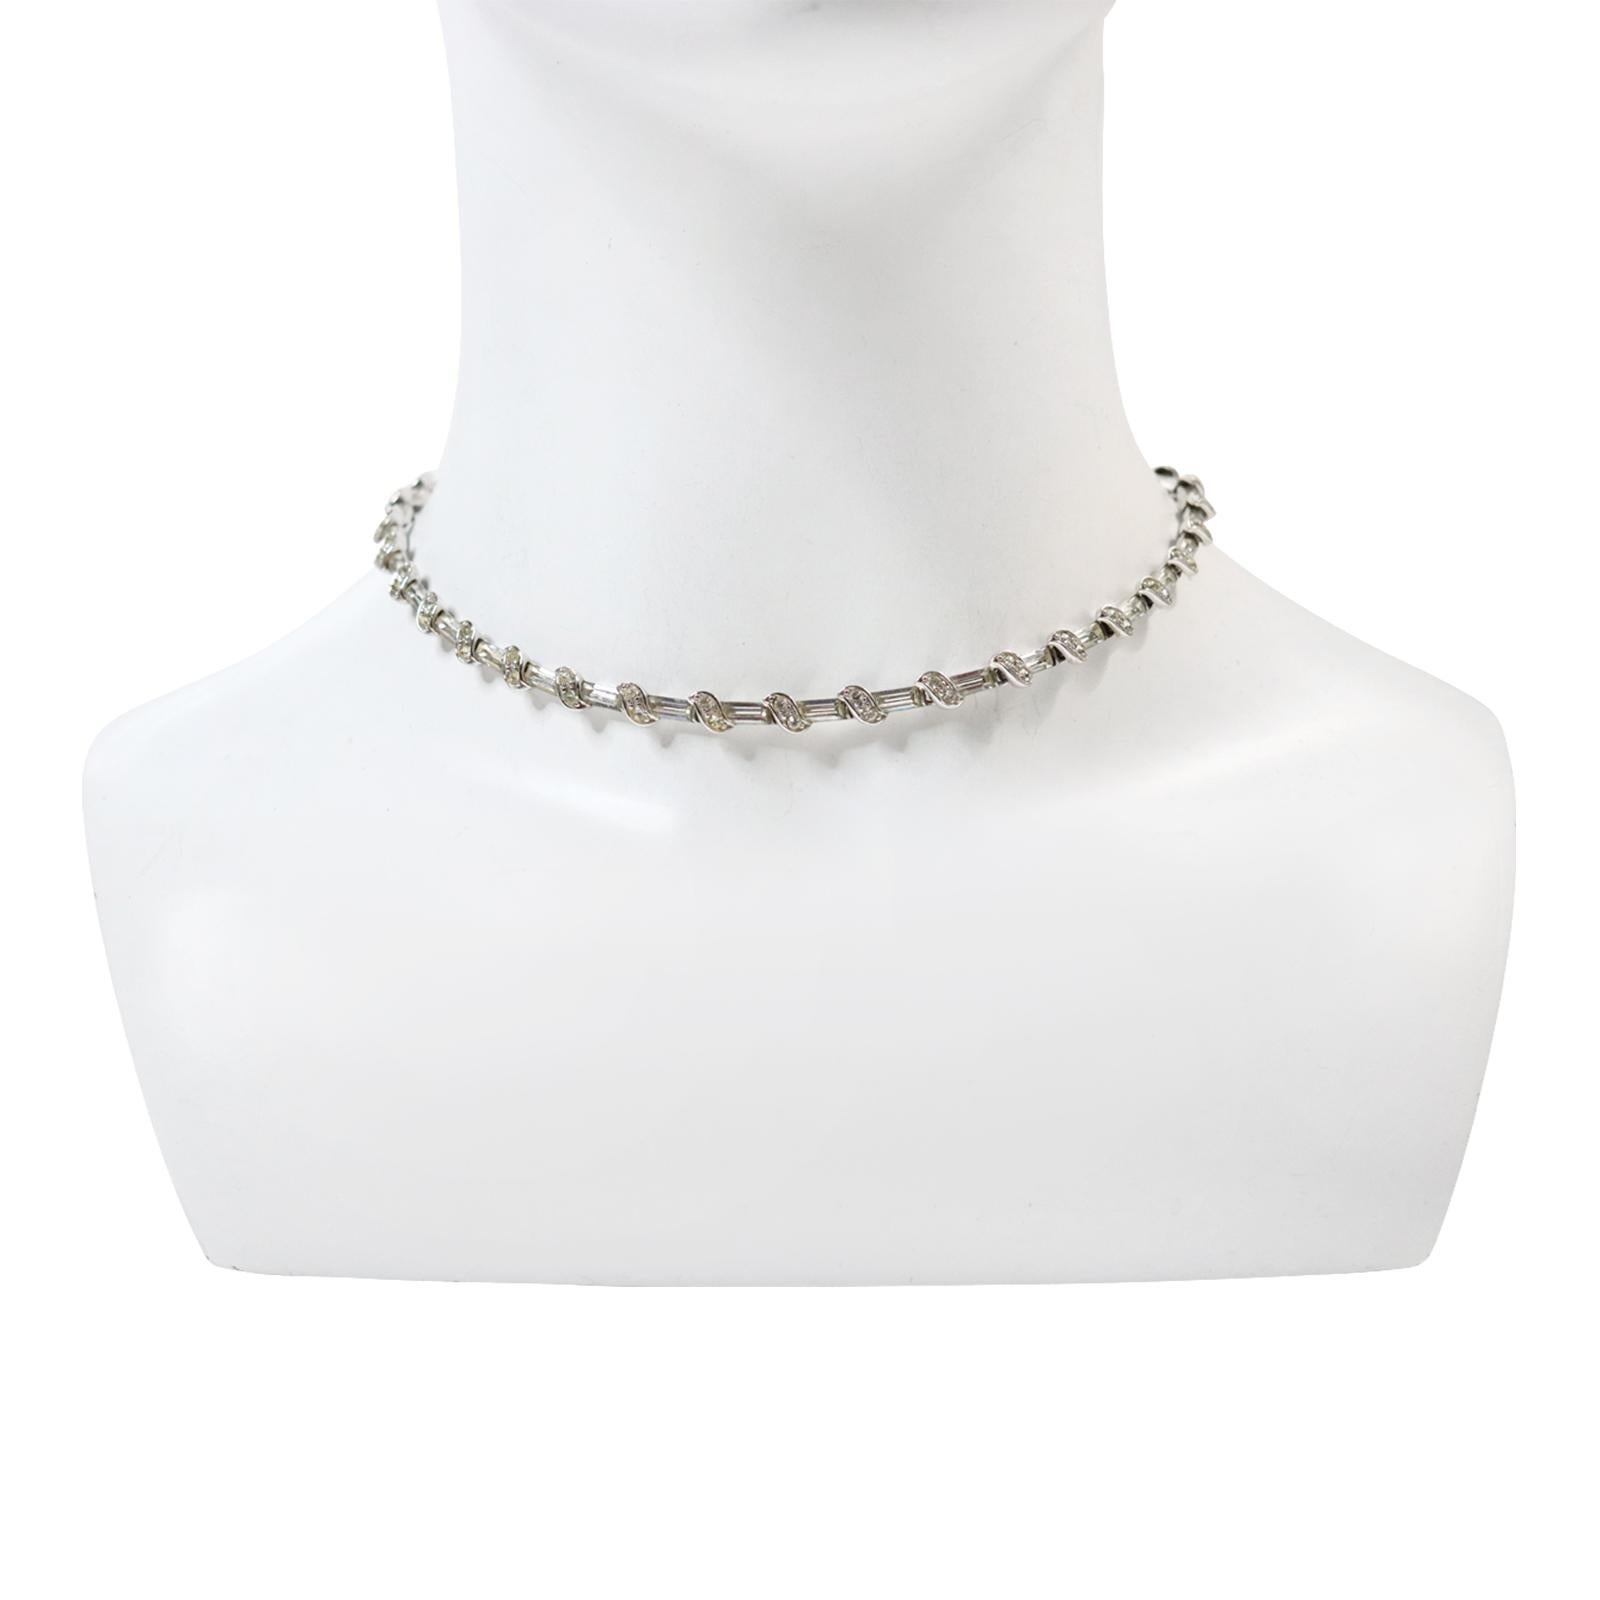 Modern Vintage Pennino Baguette and Link Art Deco Choker Necklace Circa 1960s For Sale